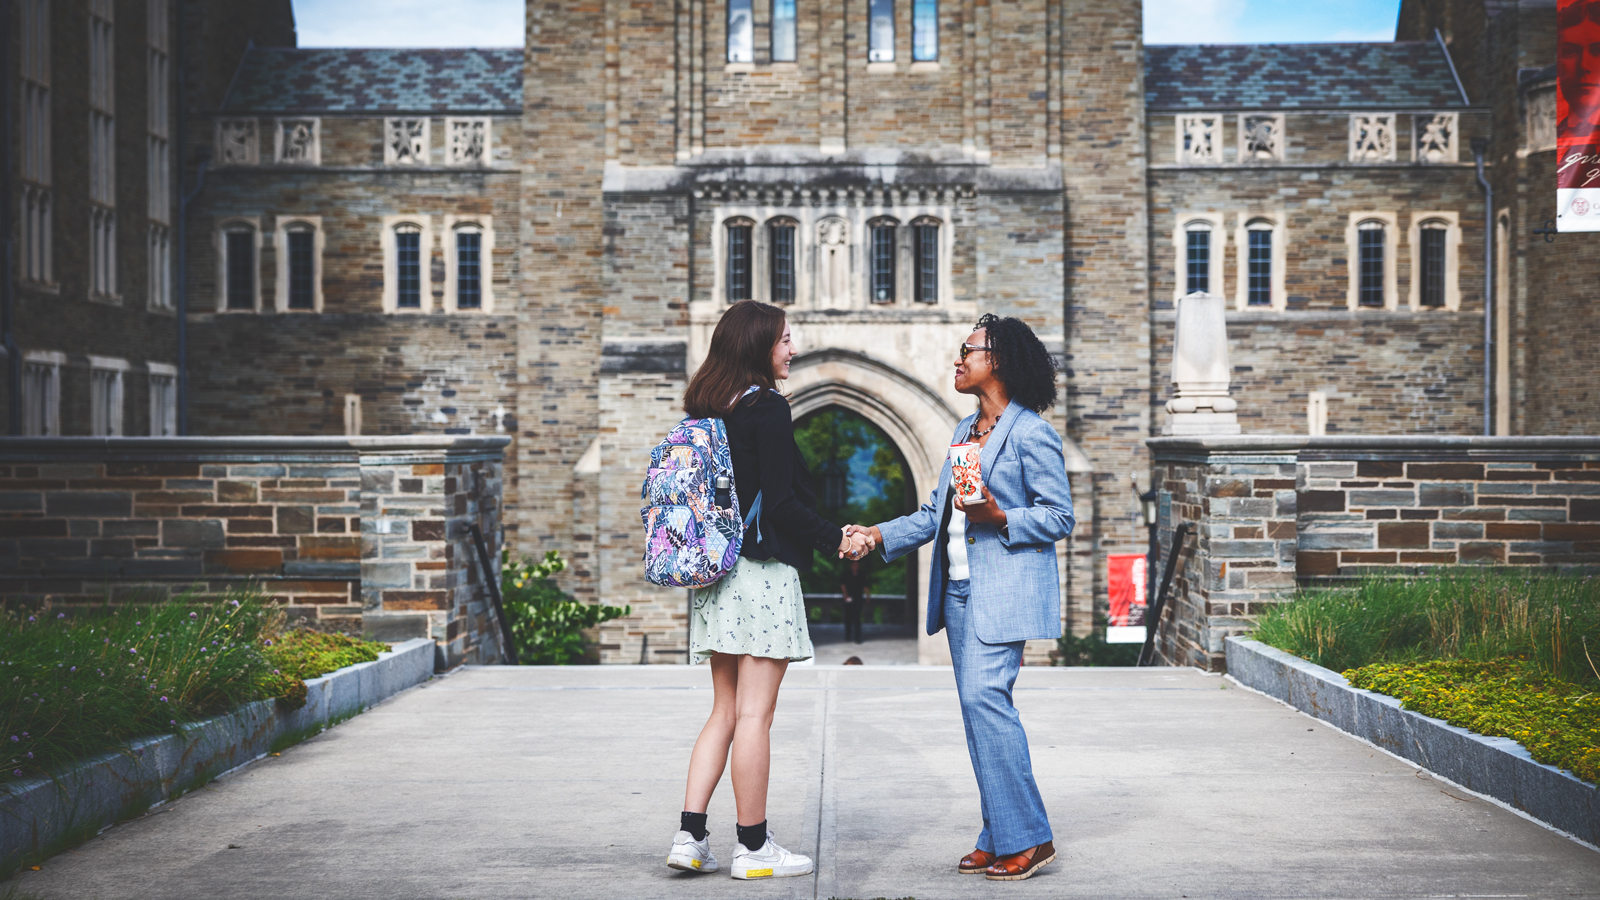 Two women shake hands on a sidewalk in front of a building on the Cornell University campus.